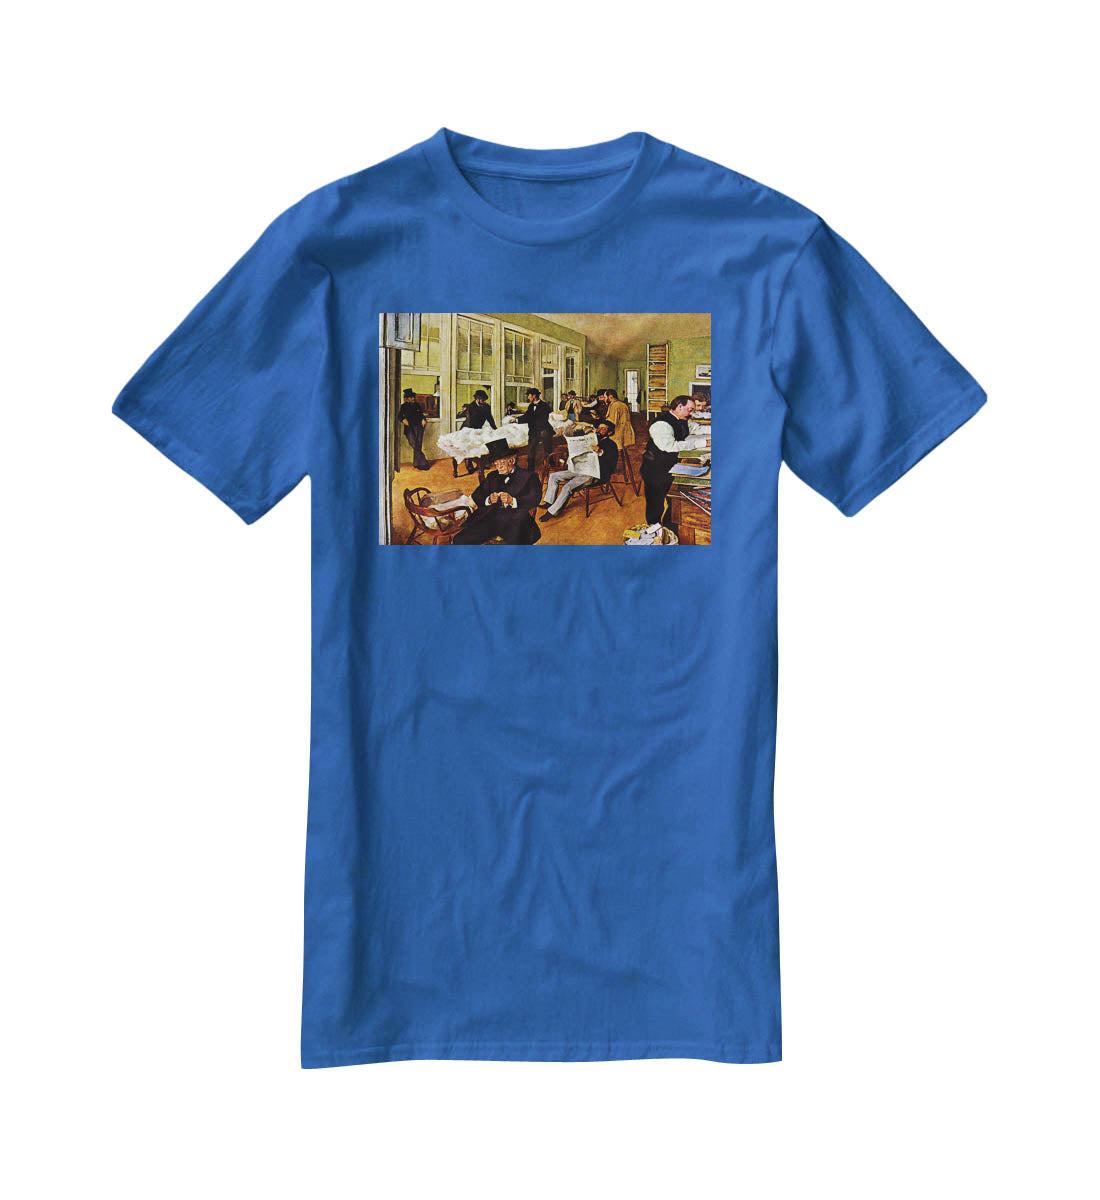 The cotton office in New Orleans by Degas T-Shirt - Canvas Art Rocks - 2